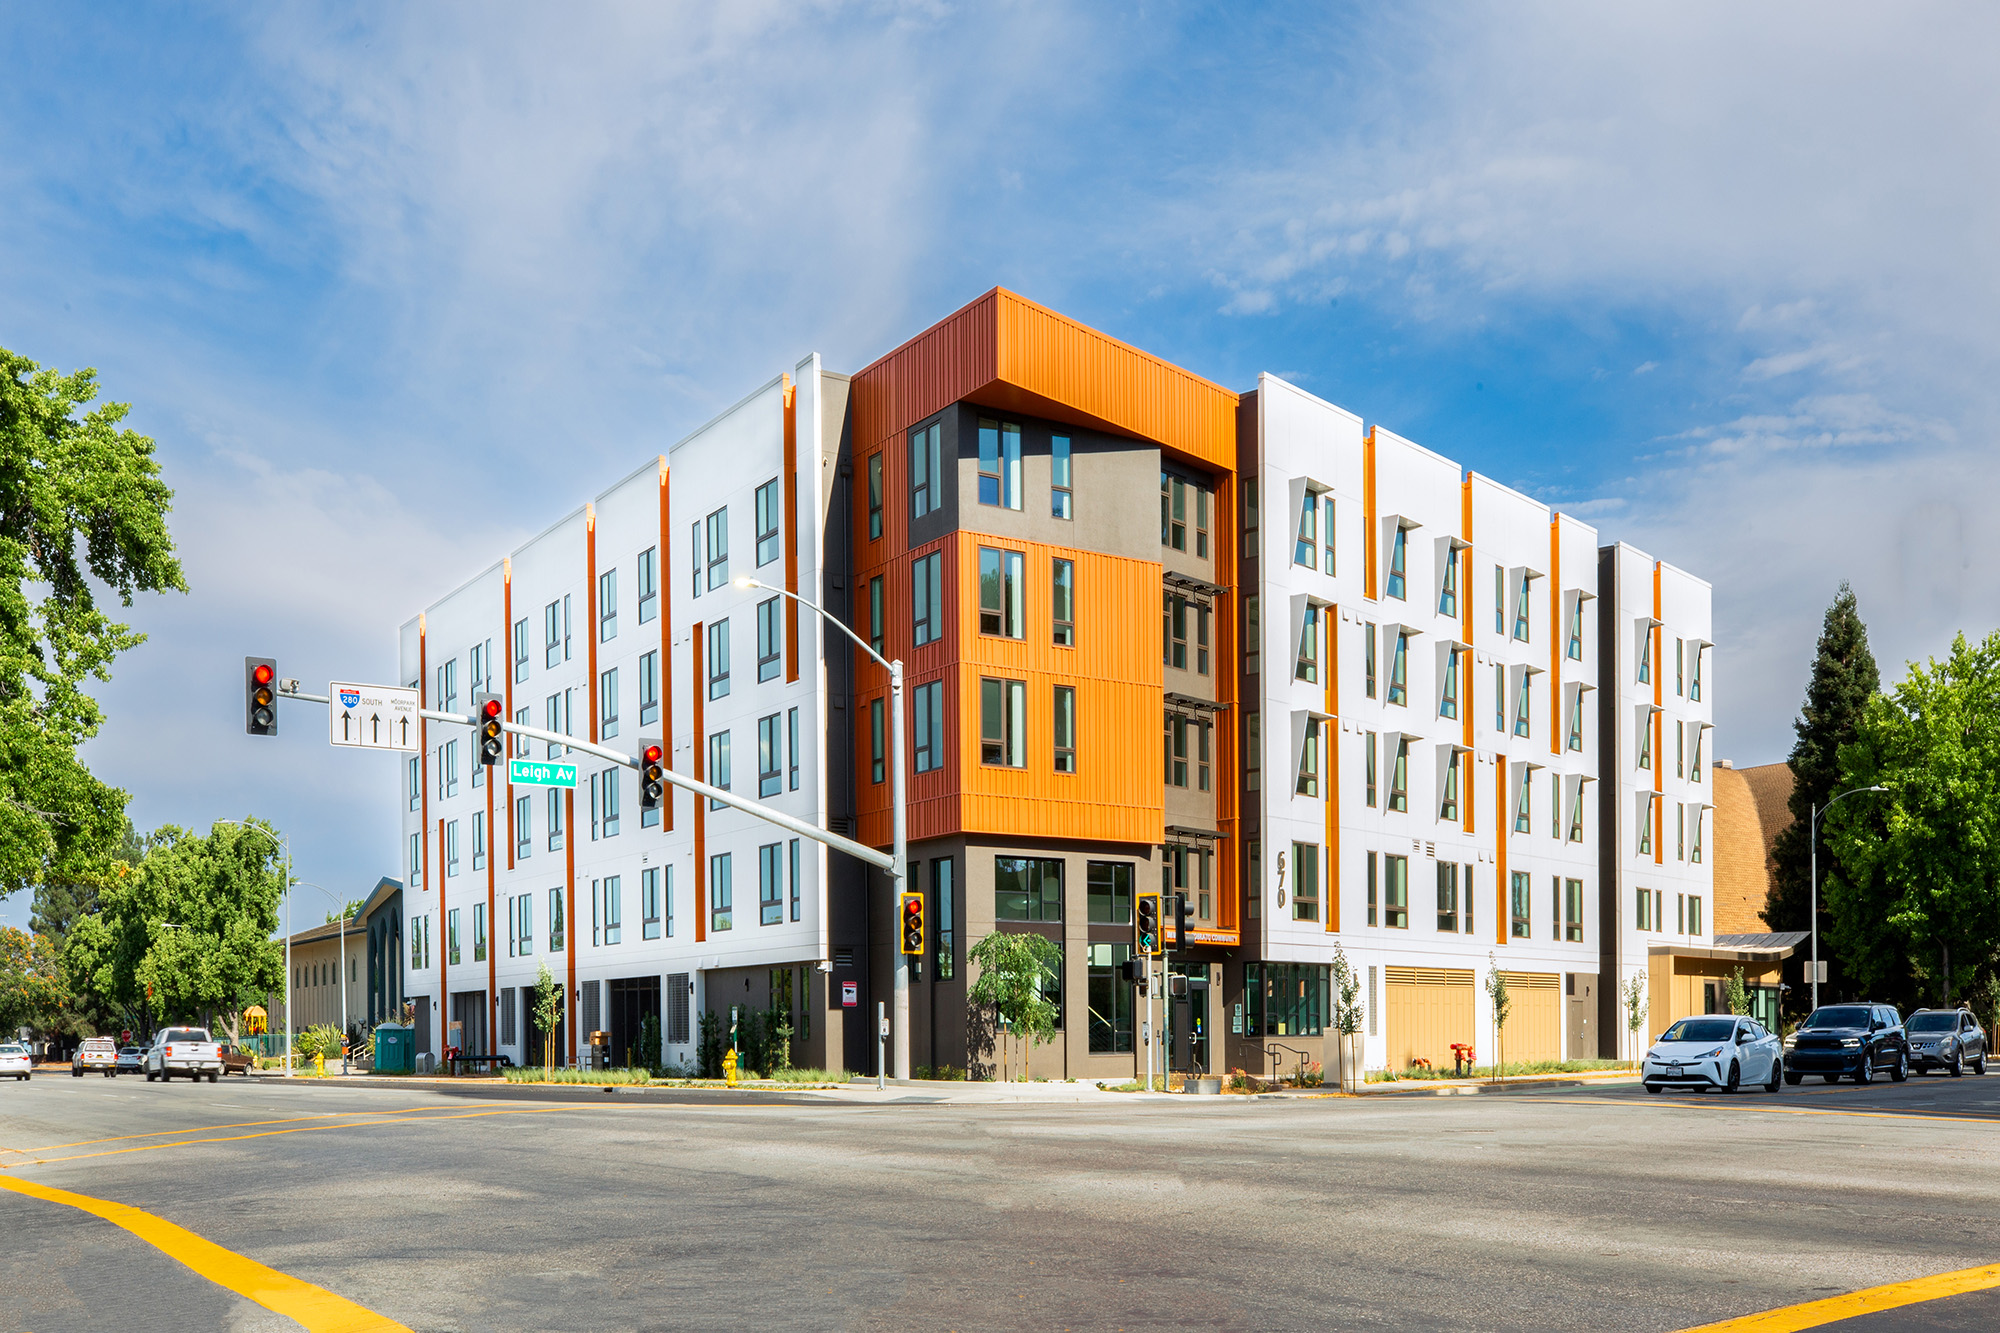  Immanuel-Sobrato Community includes 108 permanent supportive studio homes for formerly unhoused residents in San Jose